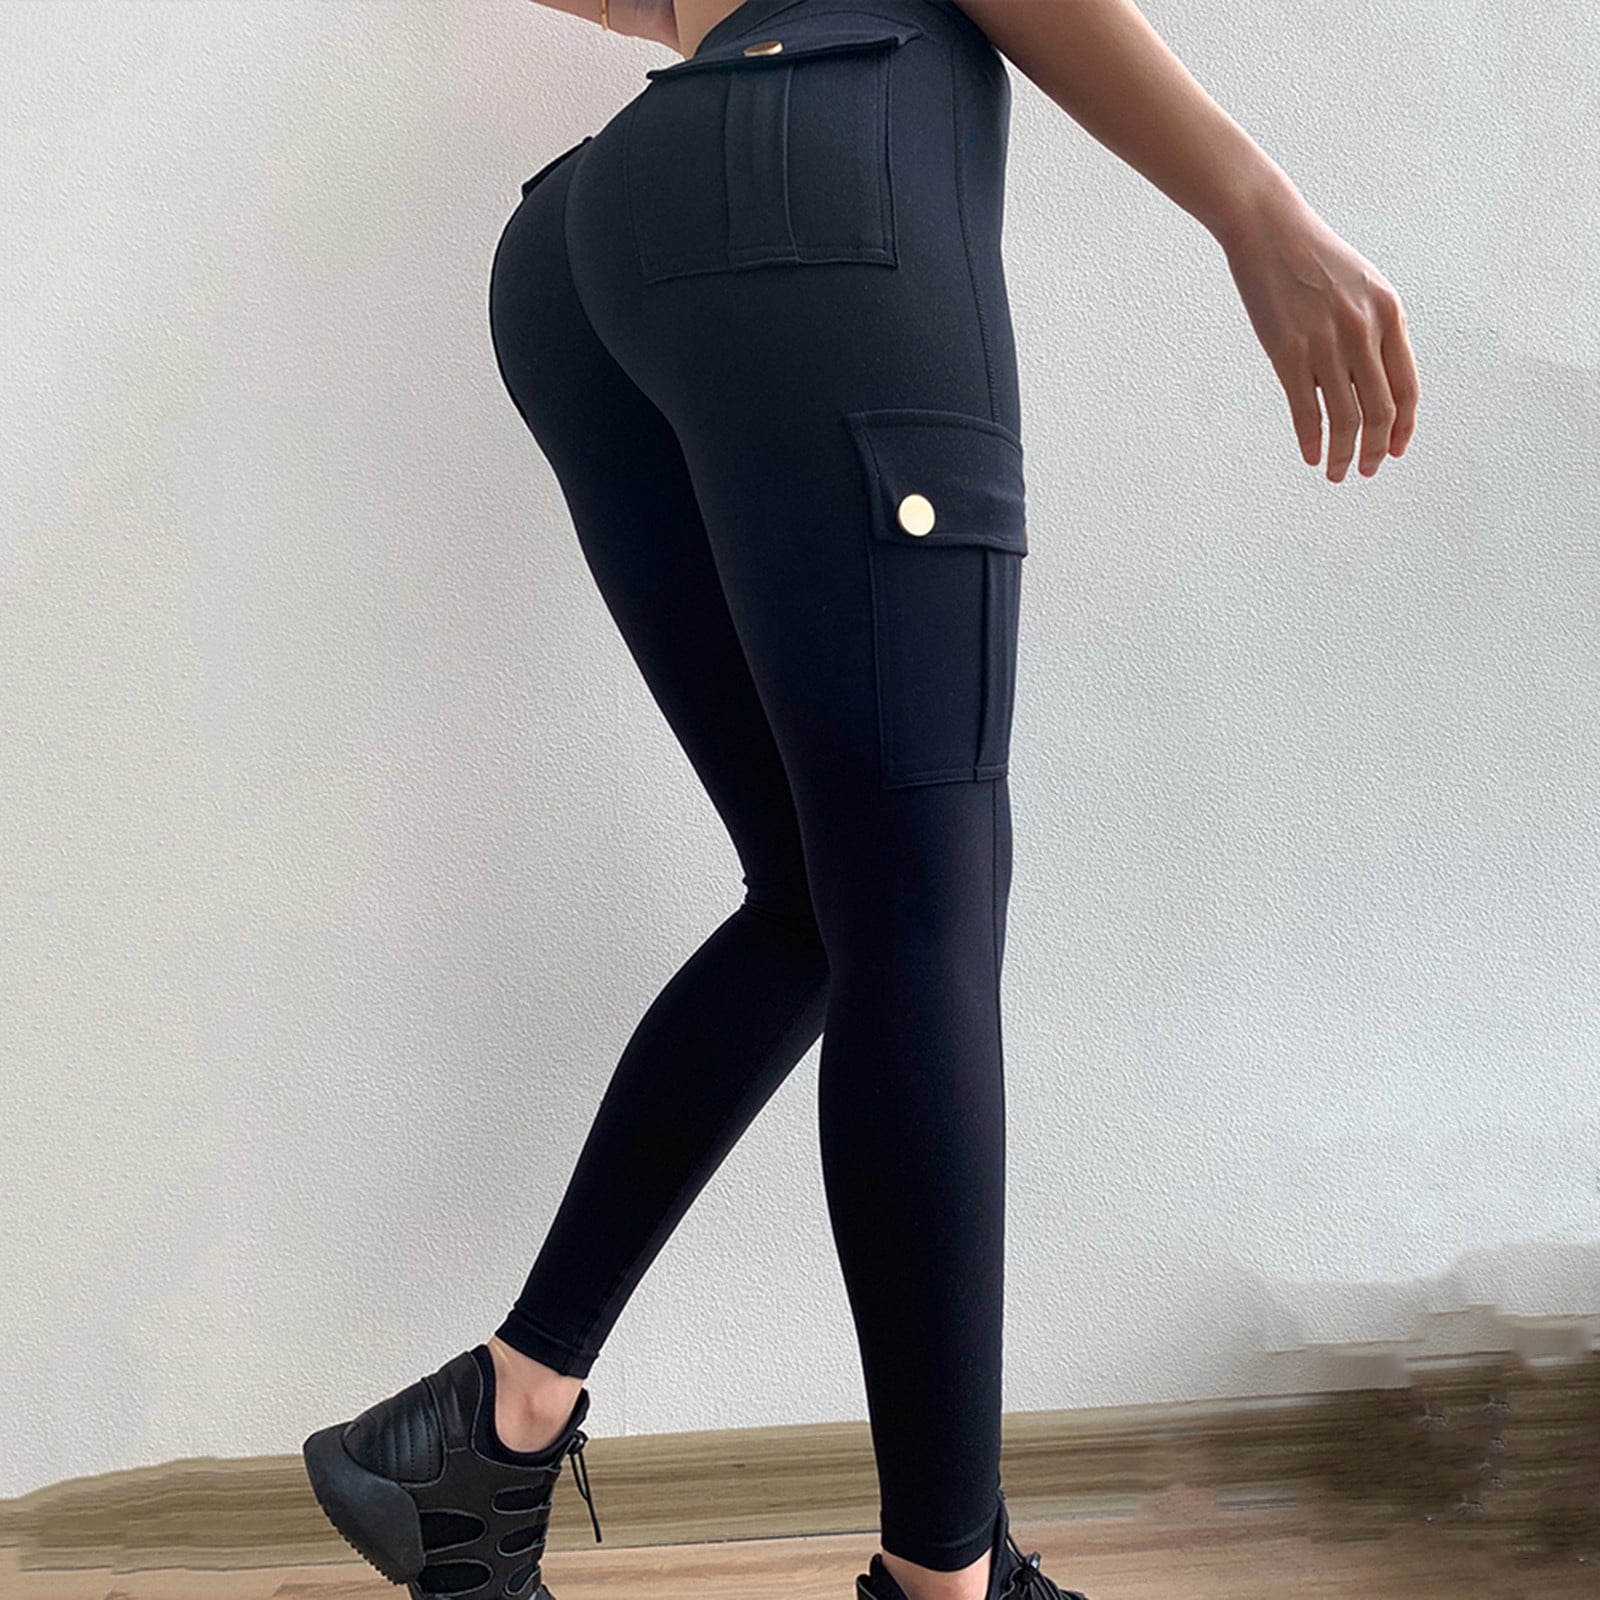 New Arrivals,Multi Pockets Stretchy Yoga Fitness Pants Tight-Fitting Sexy  Sports Pants High-Waist Quick-Drying Running Hip Trousers Black Xl 